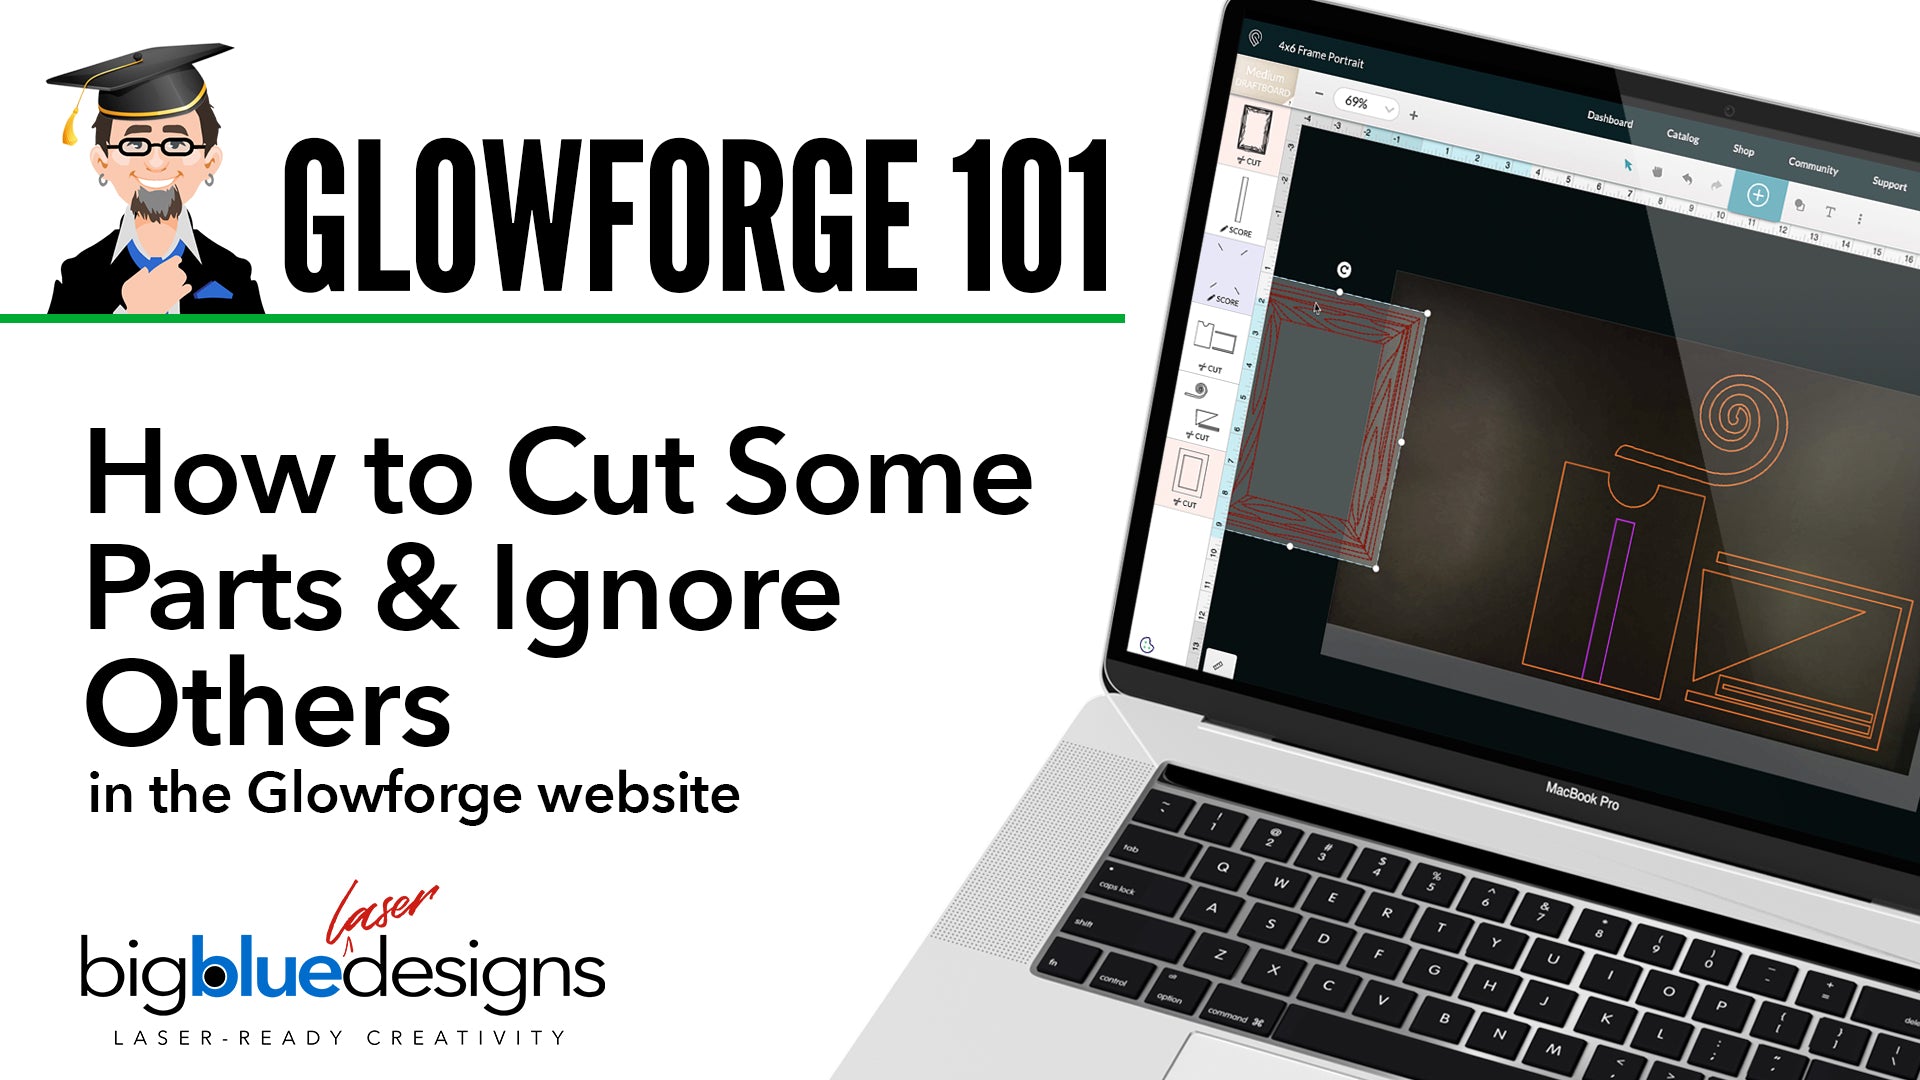 Glowforge 101: How to Cut Some Parts and Ignore Others